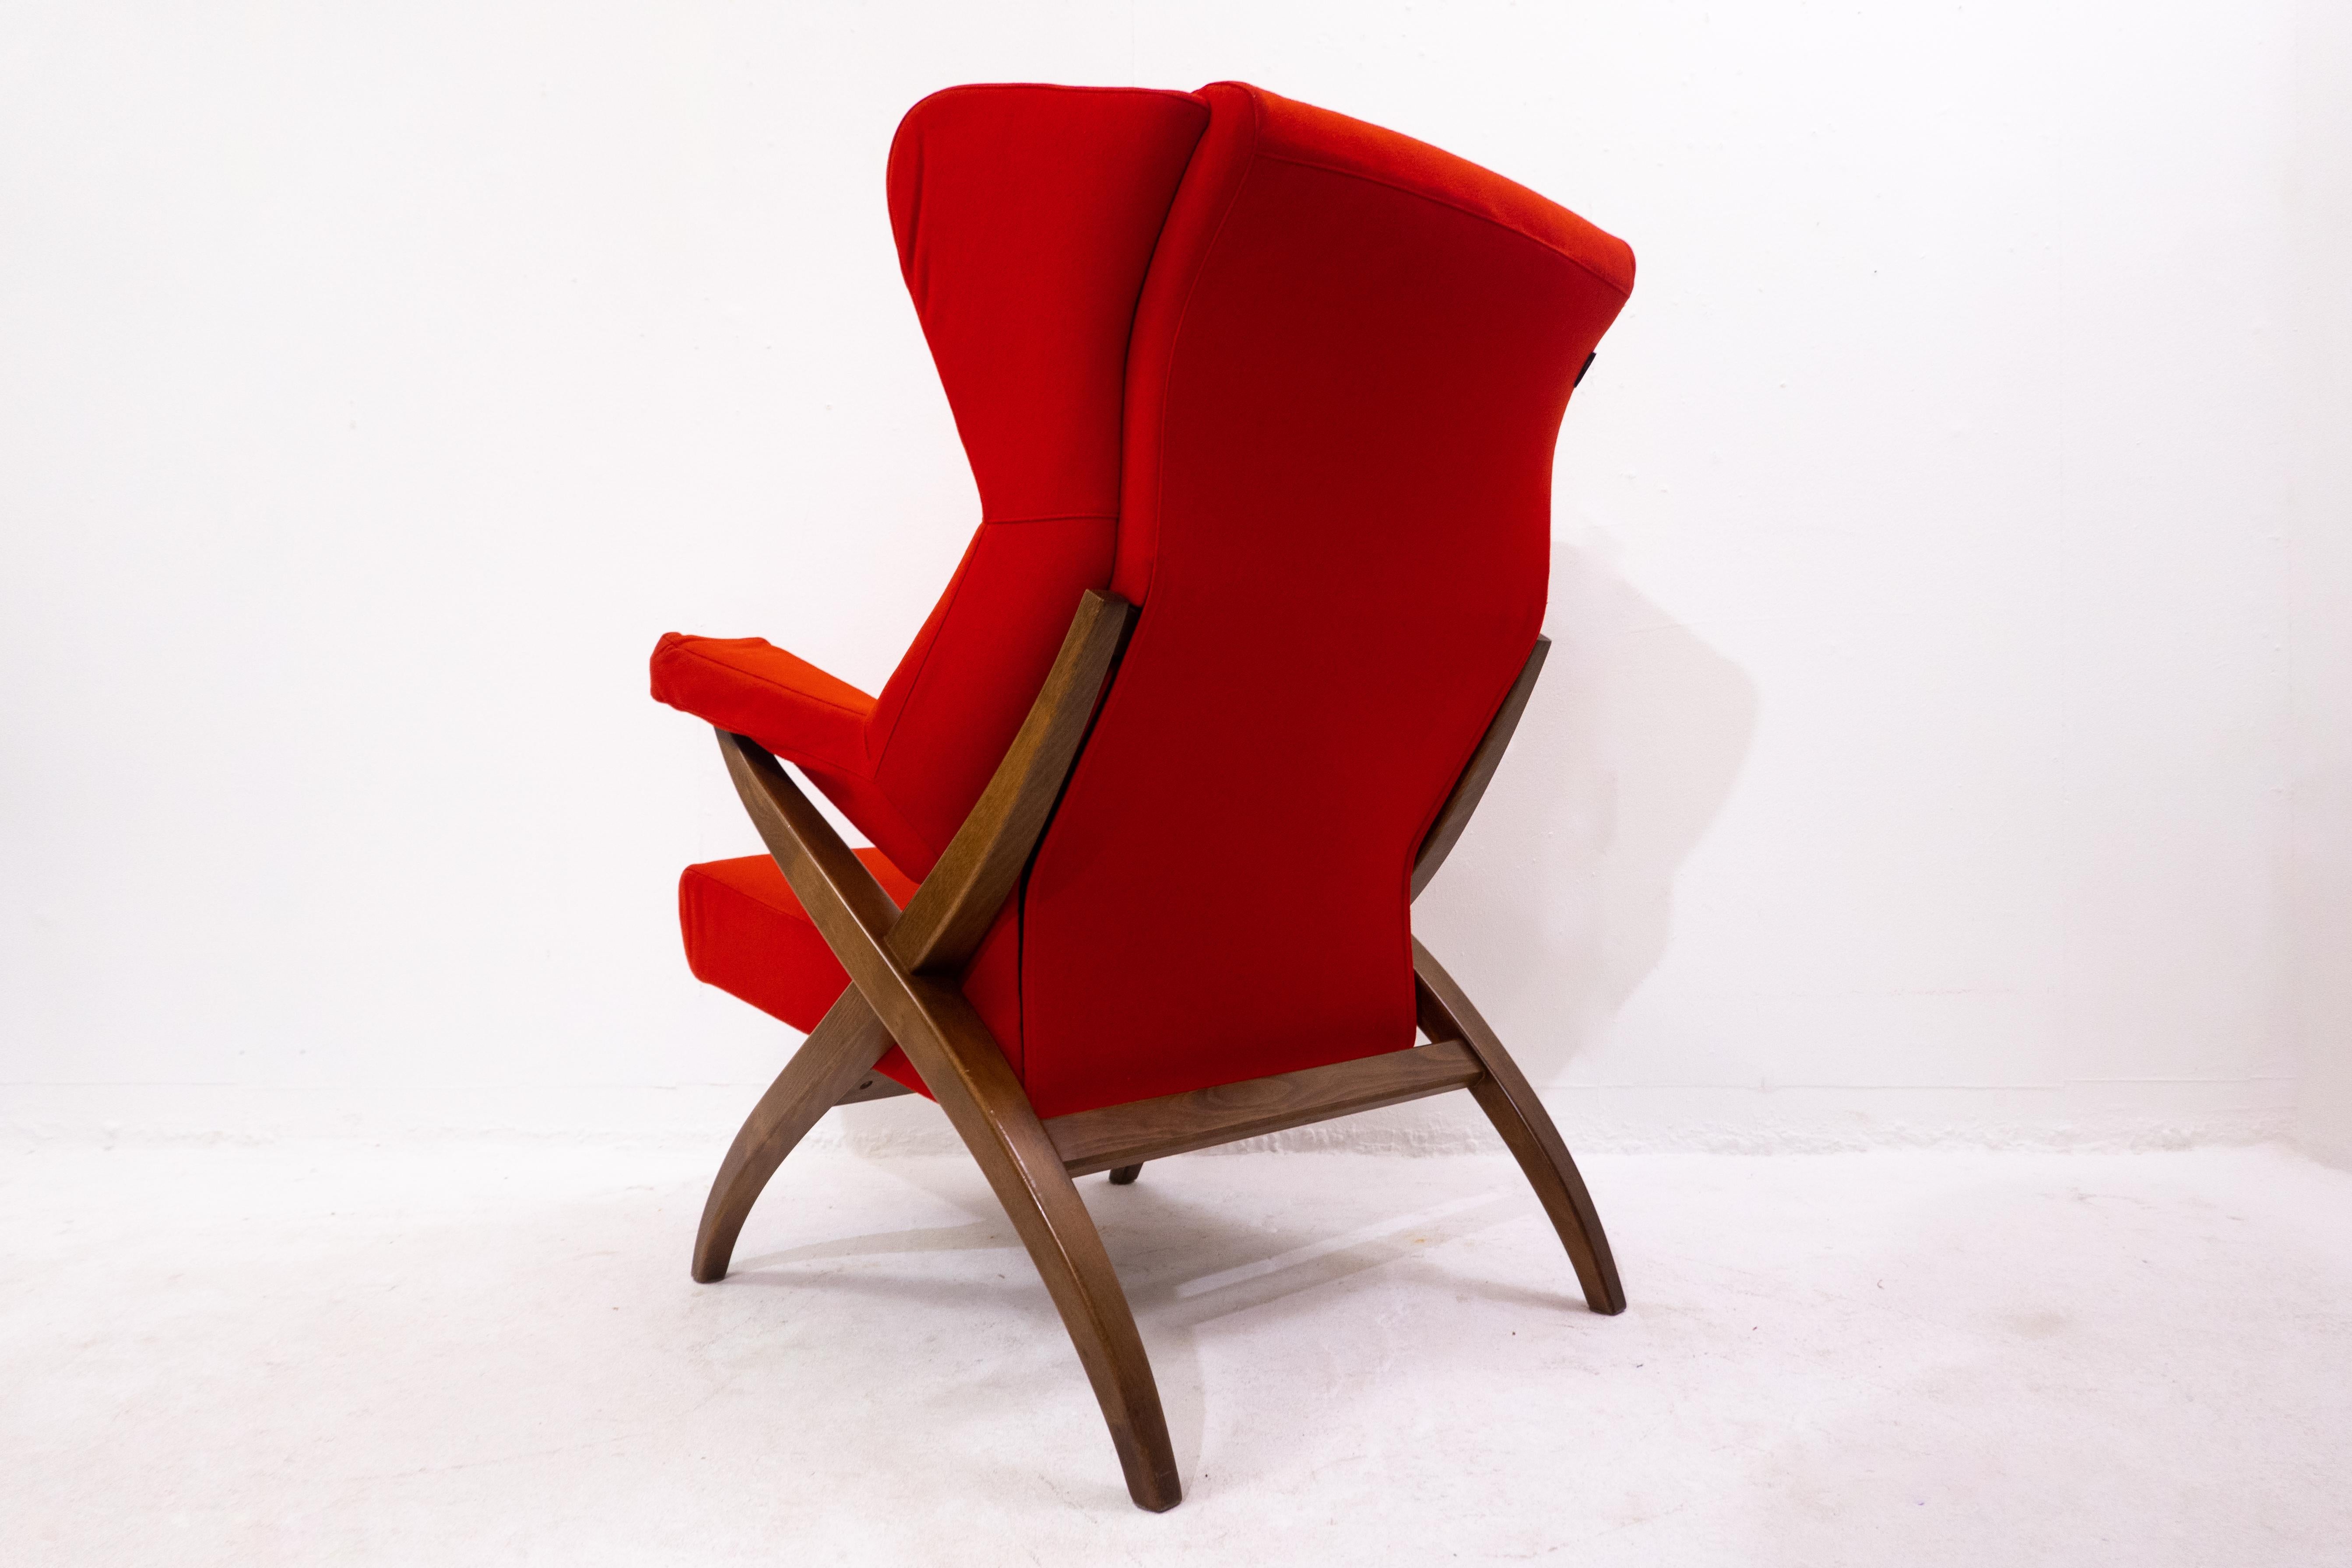 Mid-20th Century Mid-Century Modern Red Armchair Fiorenza by Franco Albini for Arflex, Italy For Sale